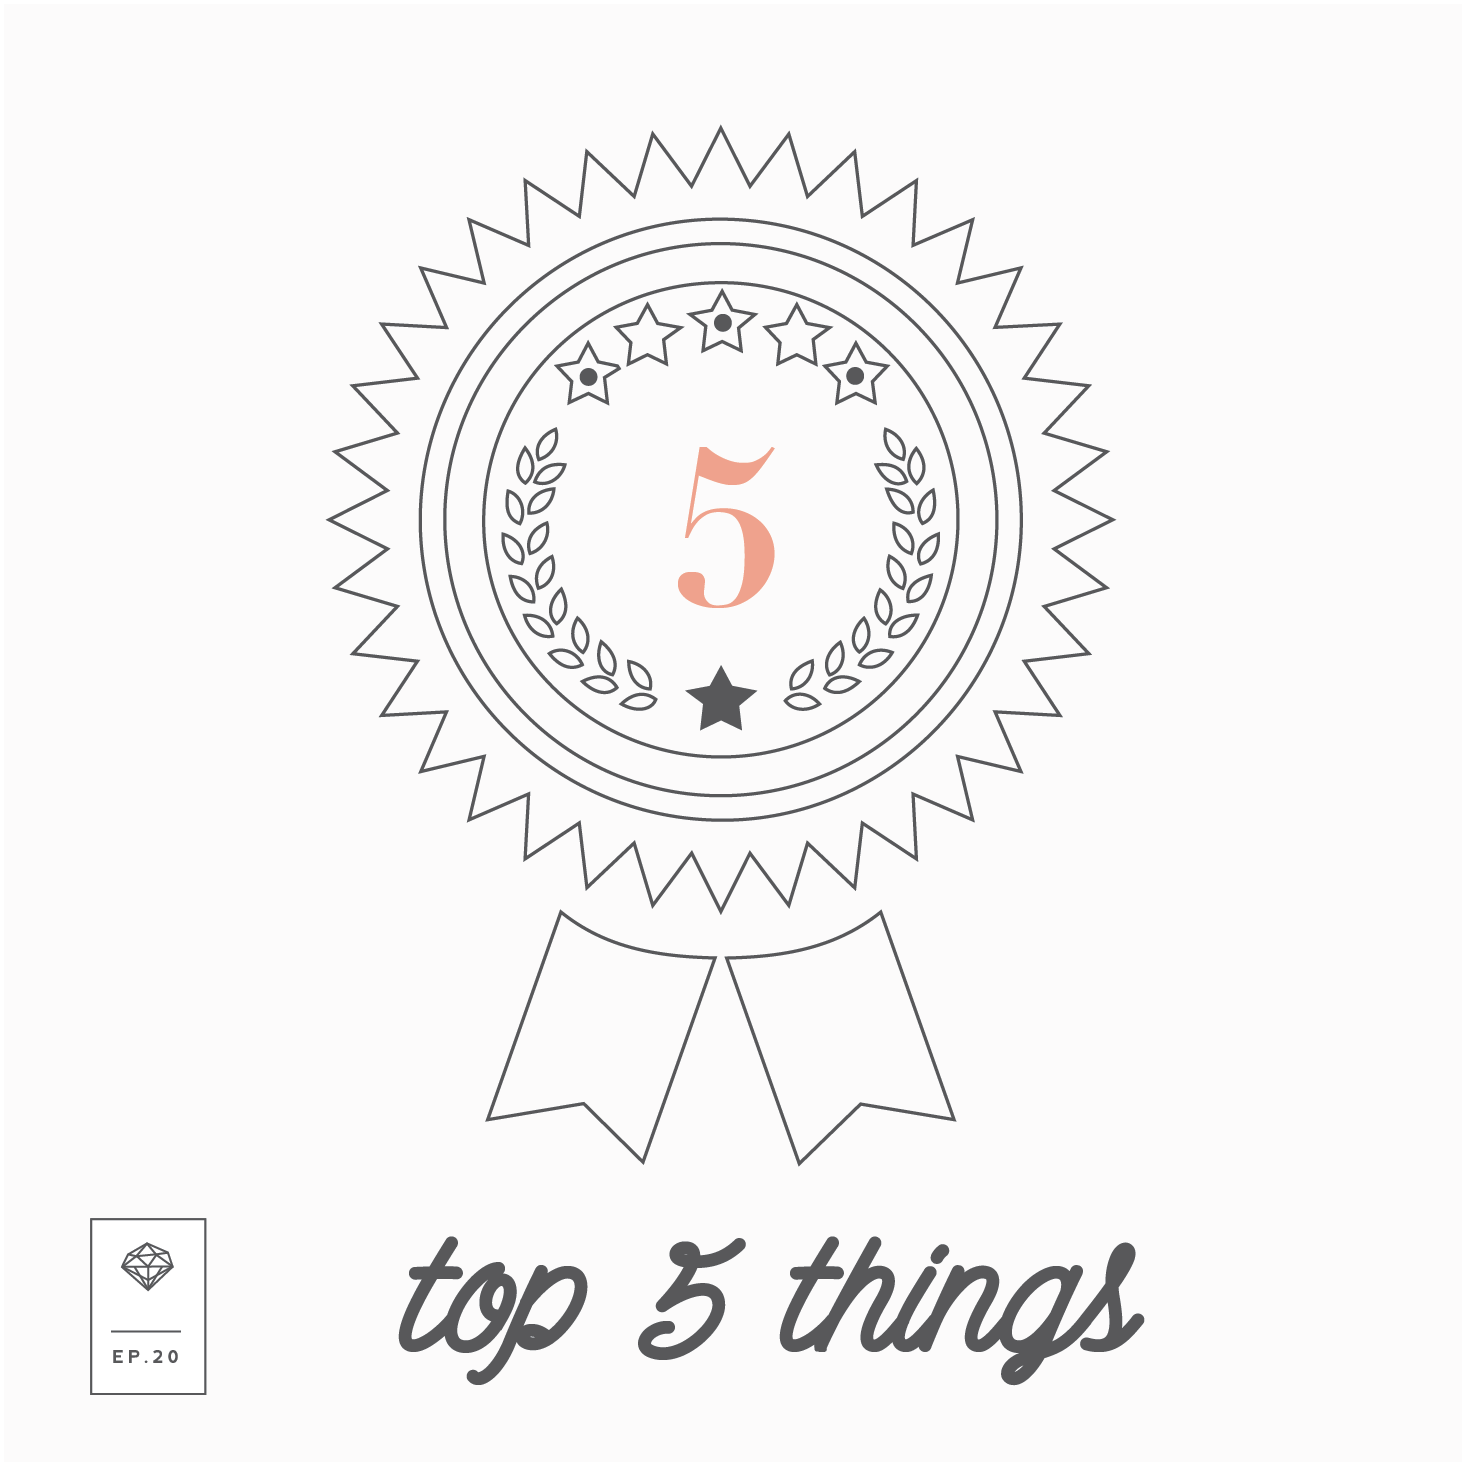 Engaged Episode Covers 03 - top 5 things-11.png